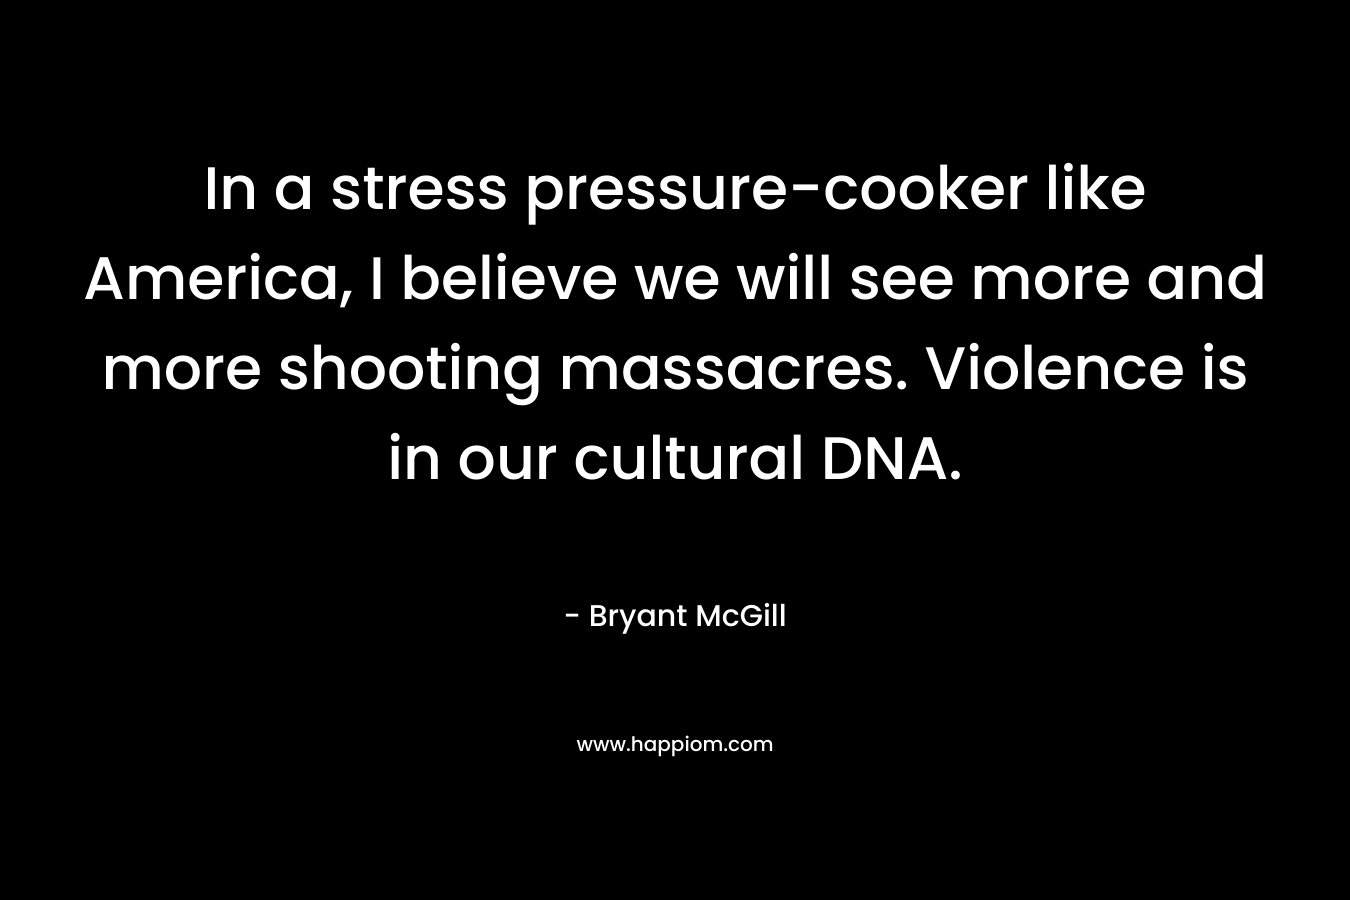 In a stress pressure-cooker like America, I believe we will see more and more shooting massacres. Violence is in our cultural DNA.